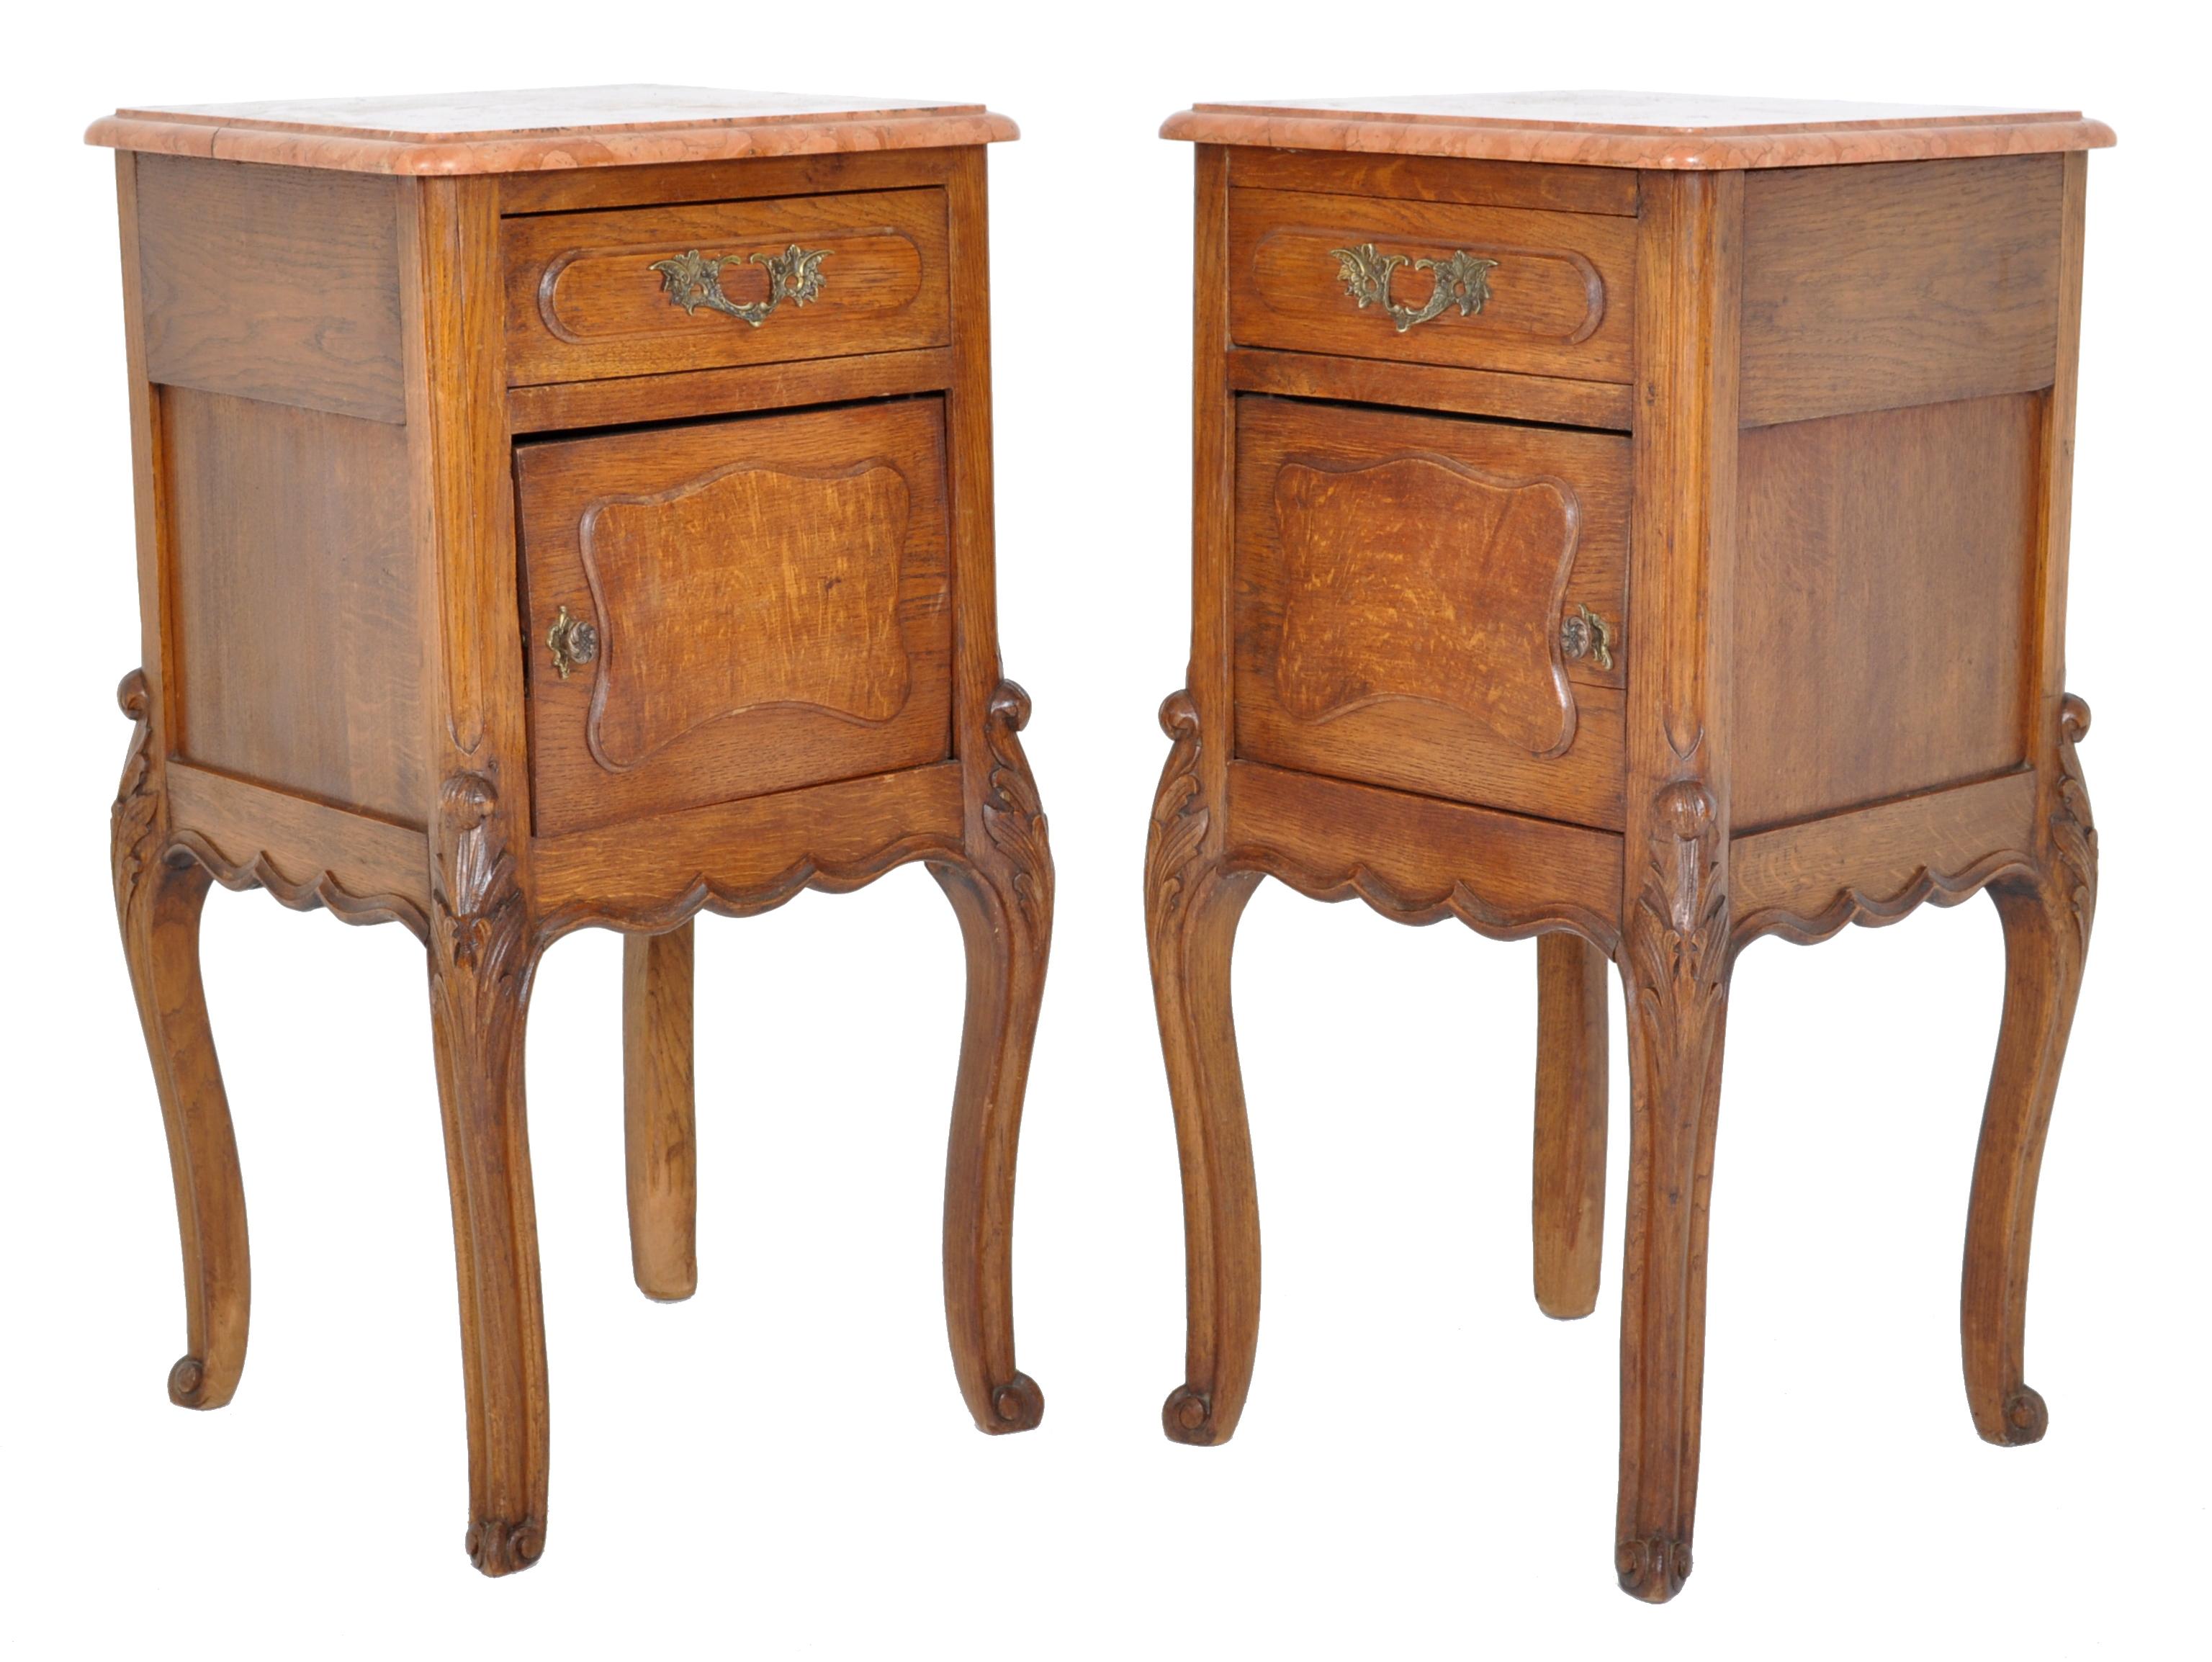 Hand-Carved Pair of Antique French Provincial Carved Oak Marble-Top Nightstands, circa 1890